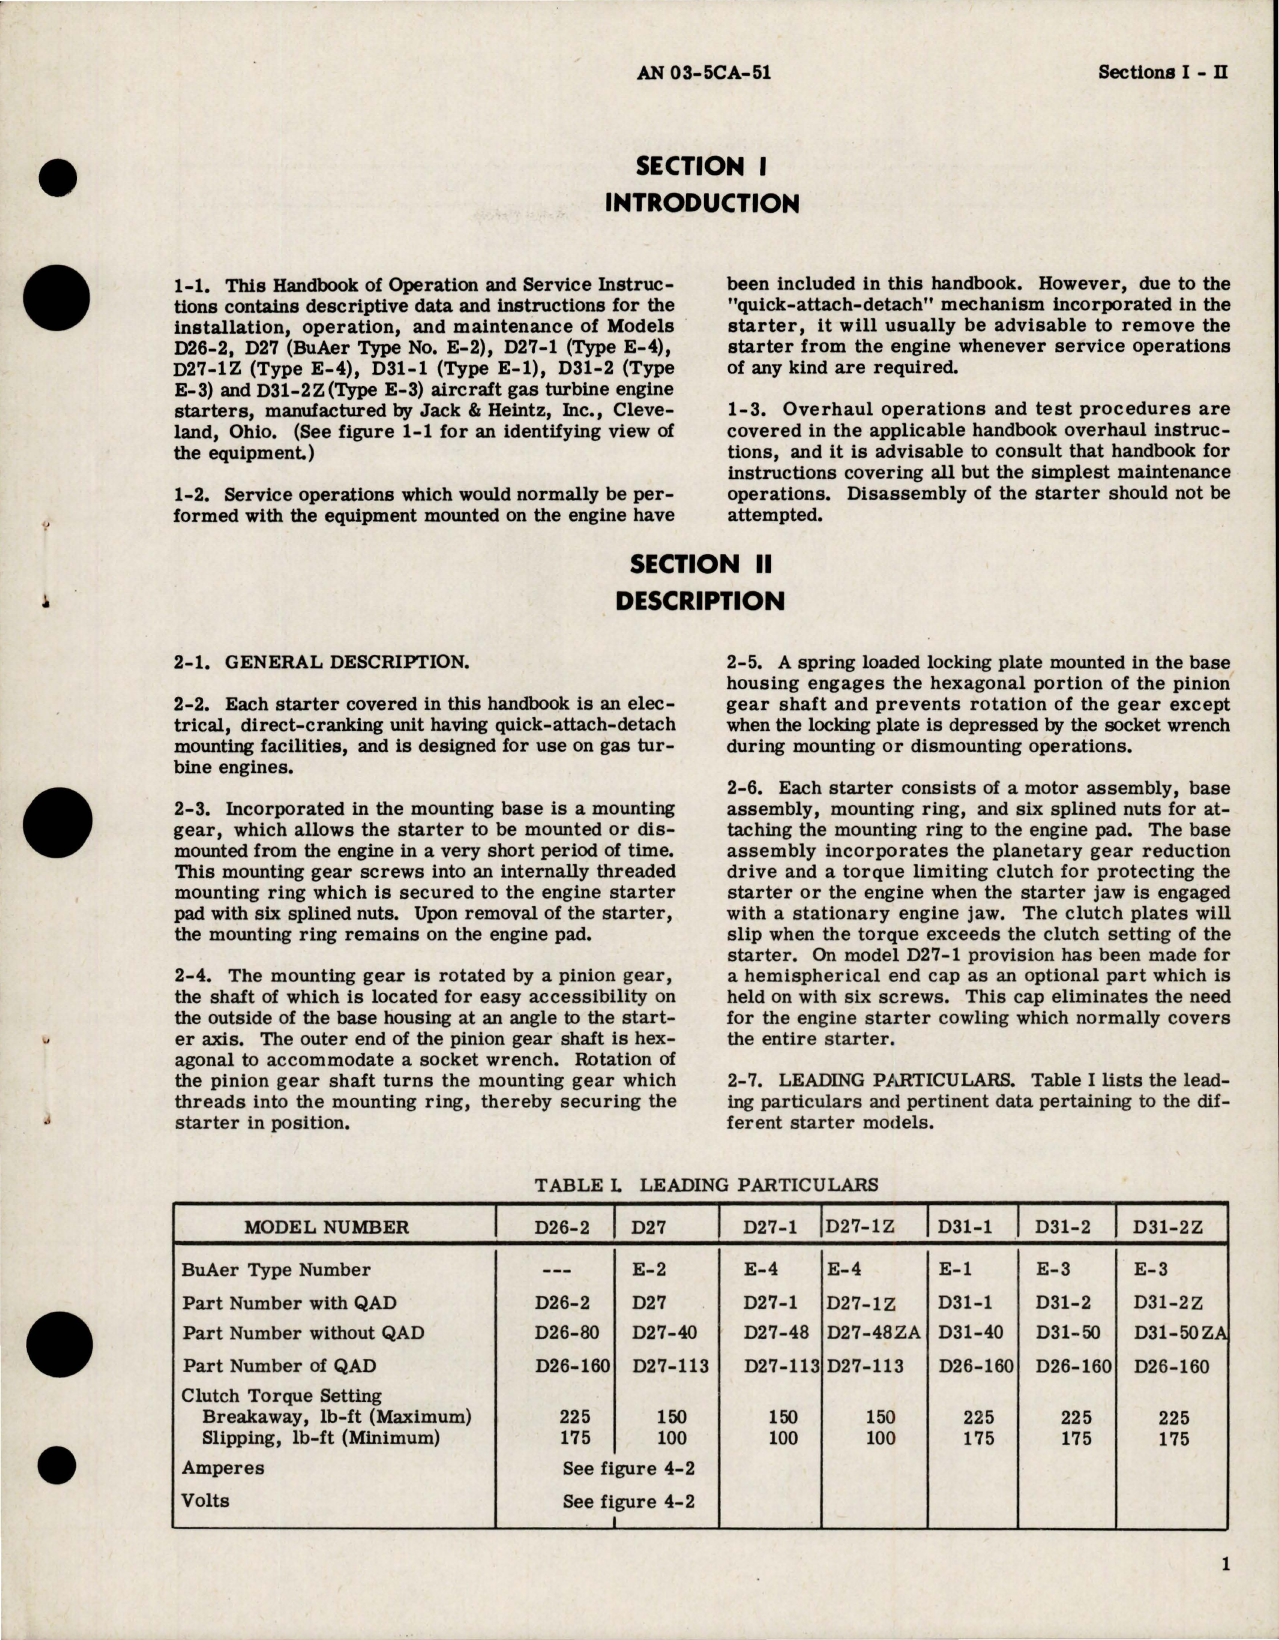 Sample page 5 from AirCorps Library document: Operation and Service Instructions for Electric Starters - D26-2, D27, D27-1, D27-1Z, D31-1, D31-2 and D31-2Z